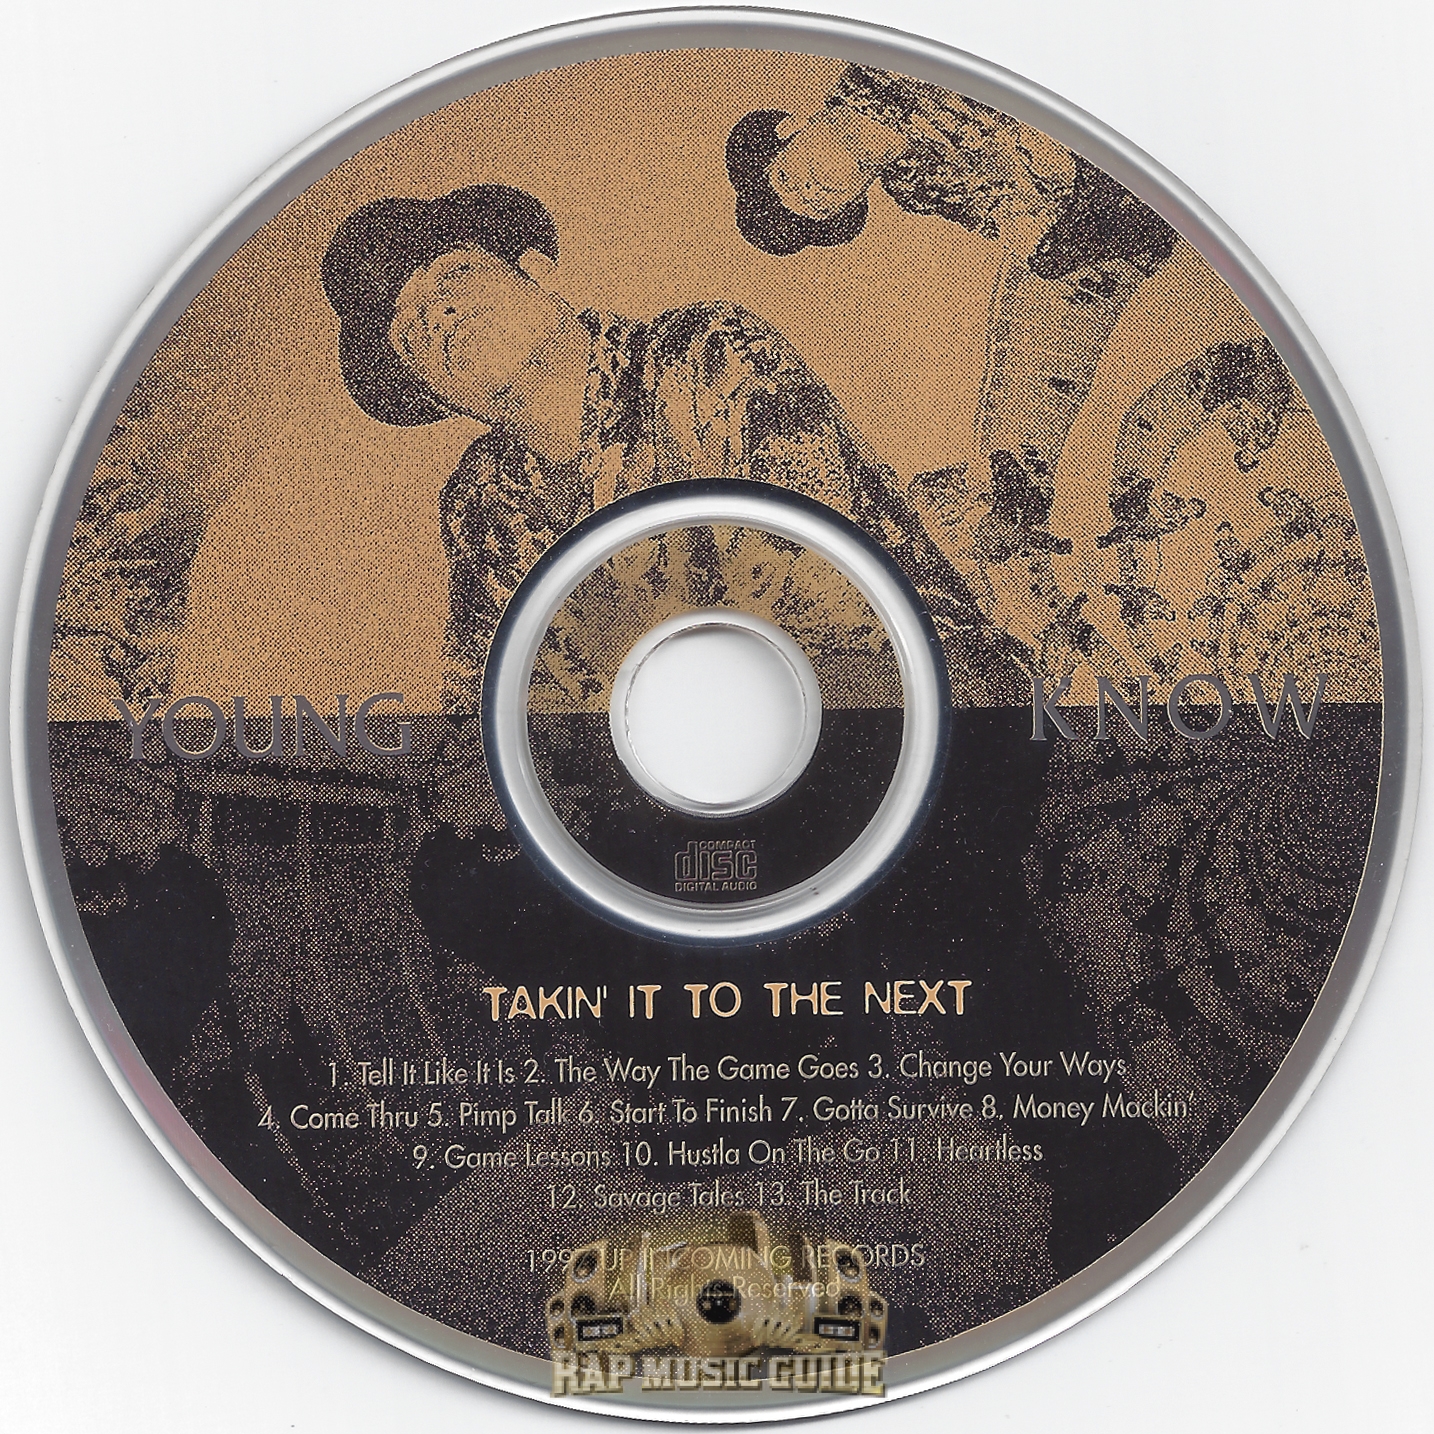 Young Know - Takin' It To The Next: CD | Rap Music Guide